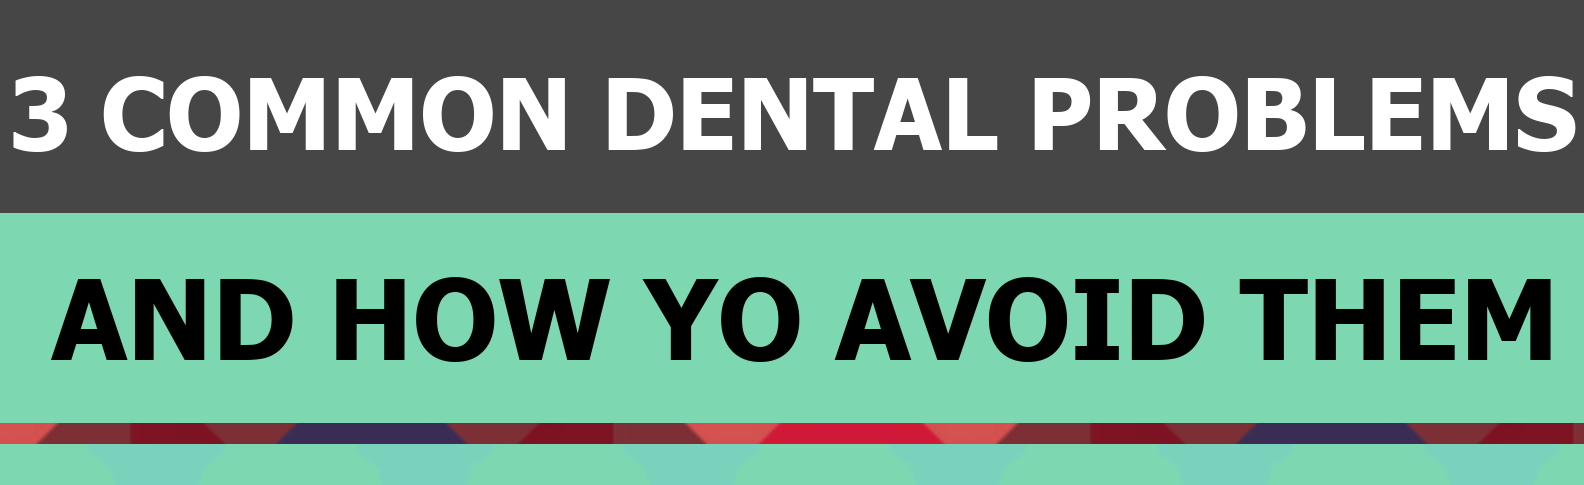 3 Common Dental Problems And How To Avoid Them